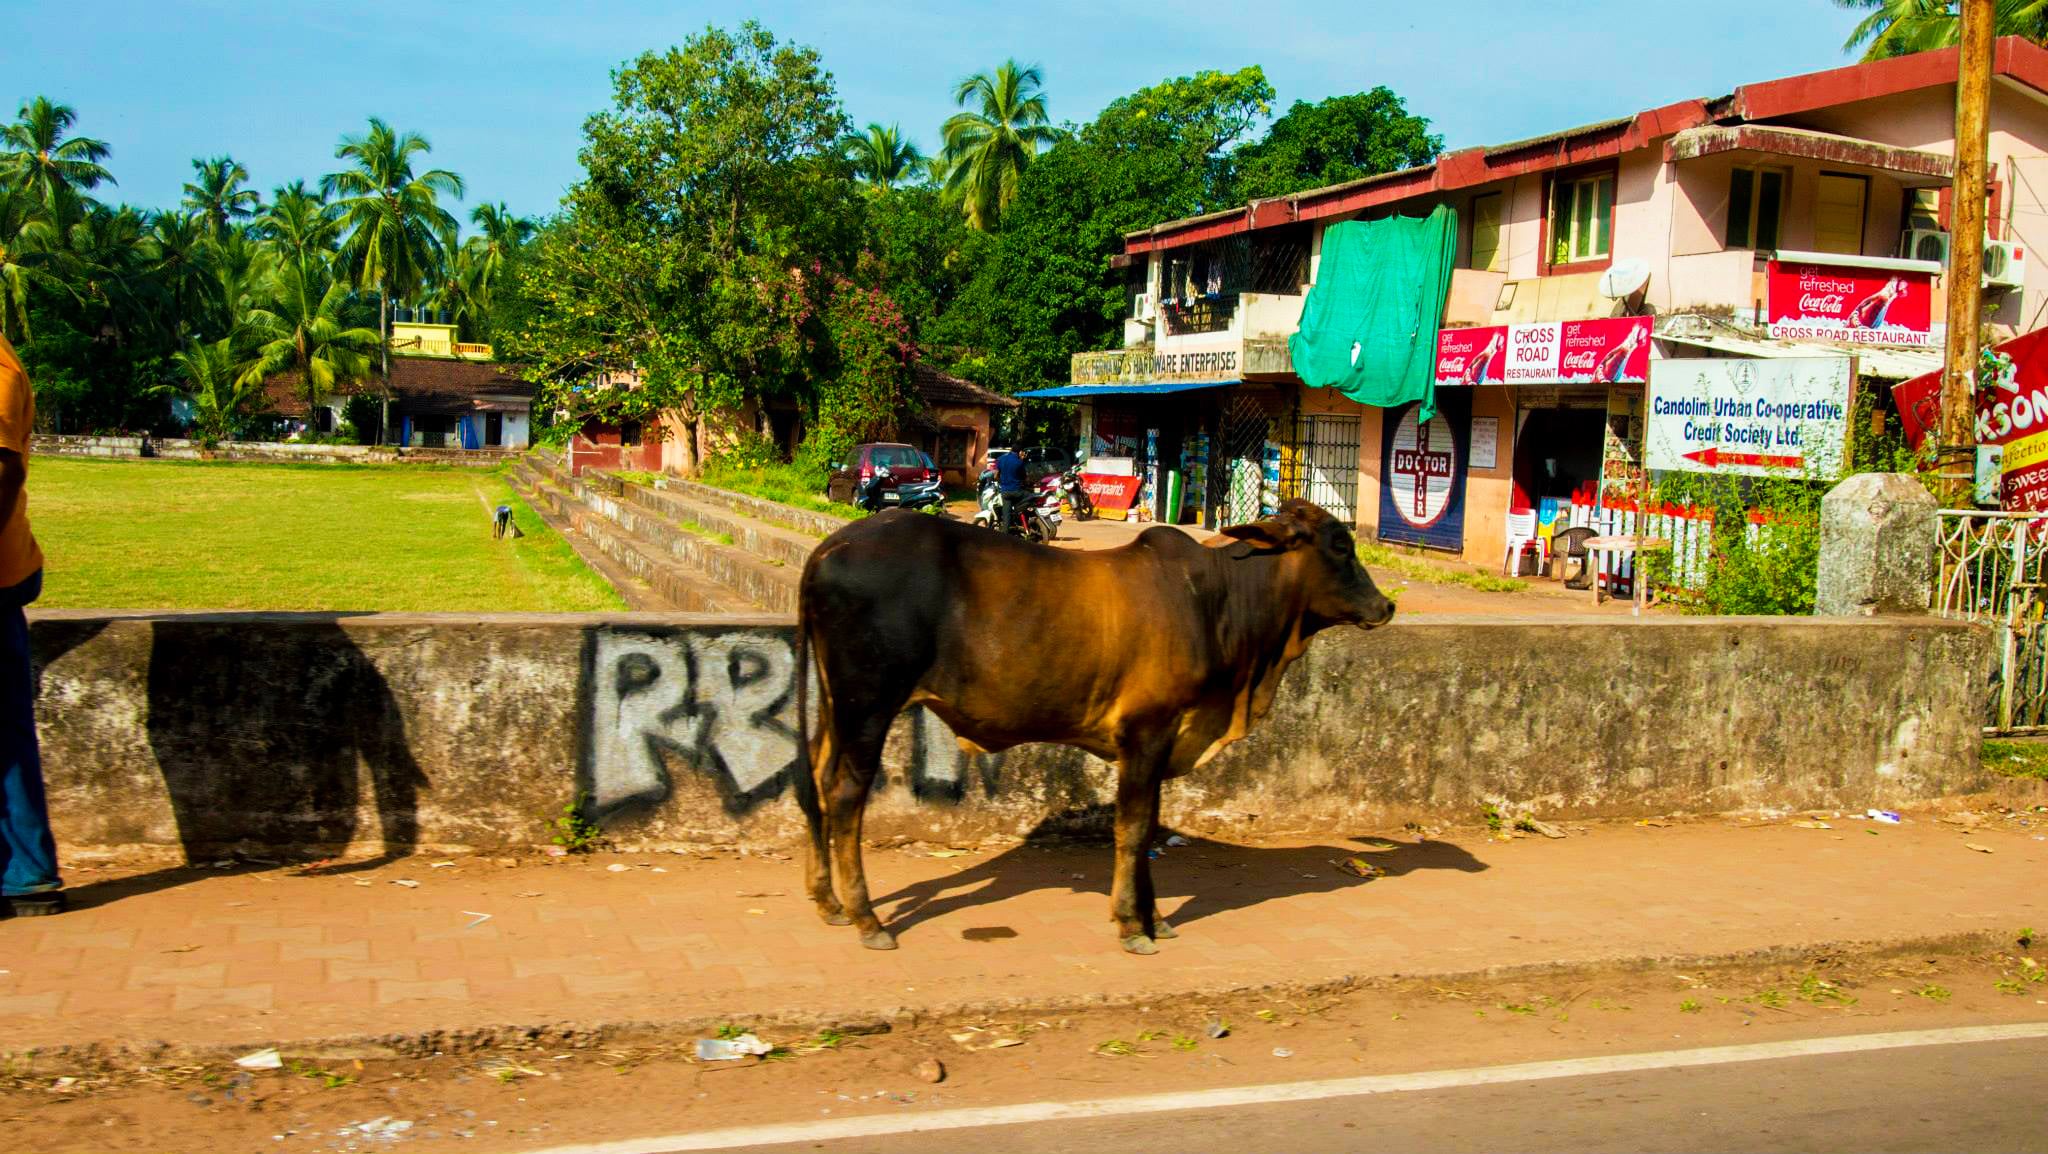 Cow roaming the streets.